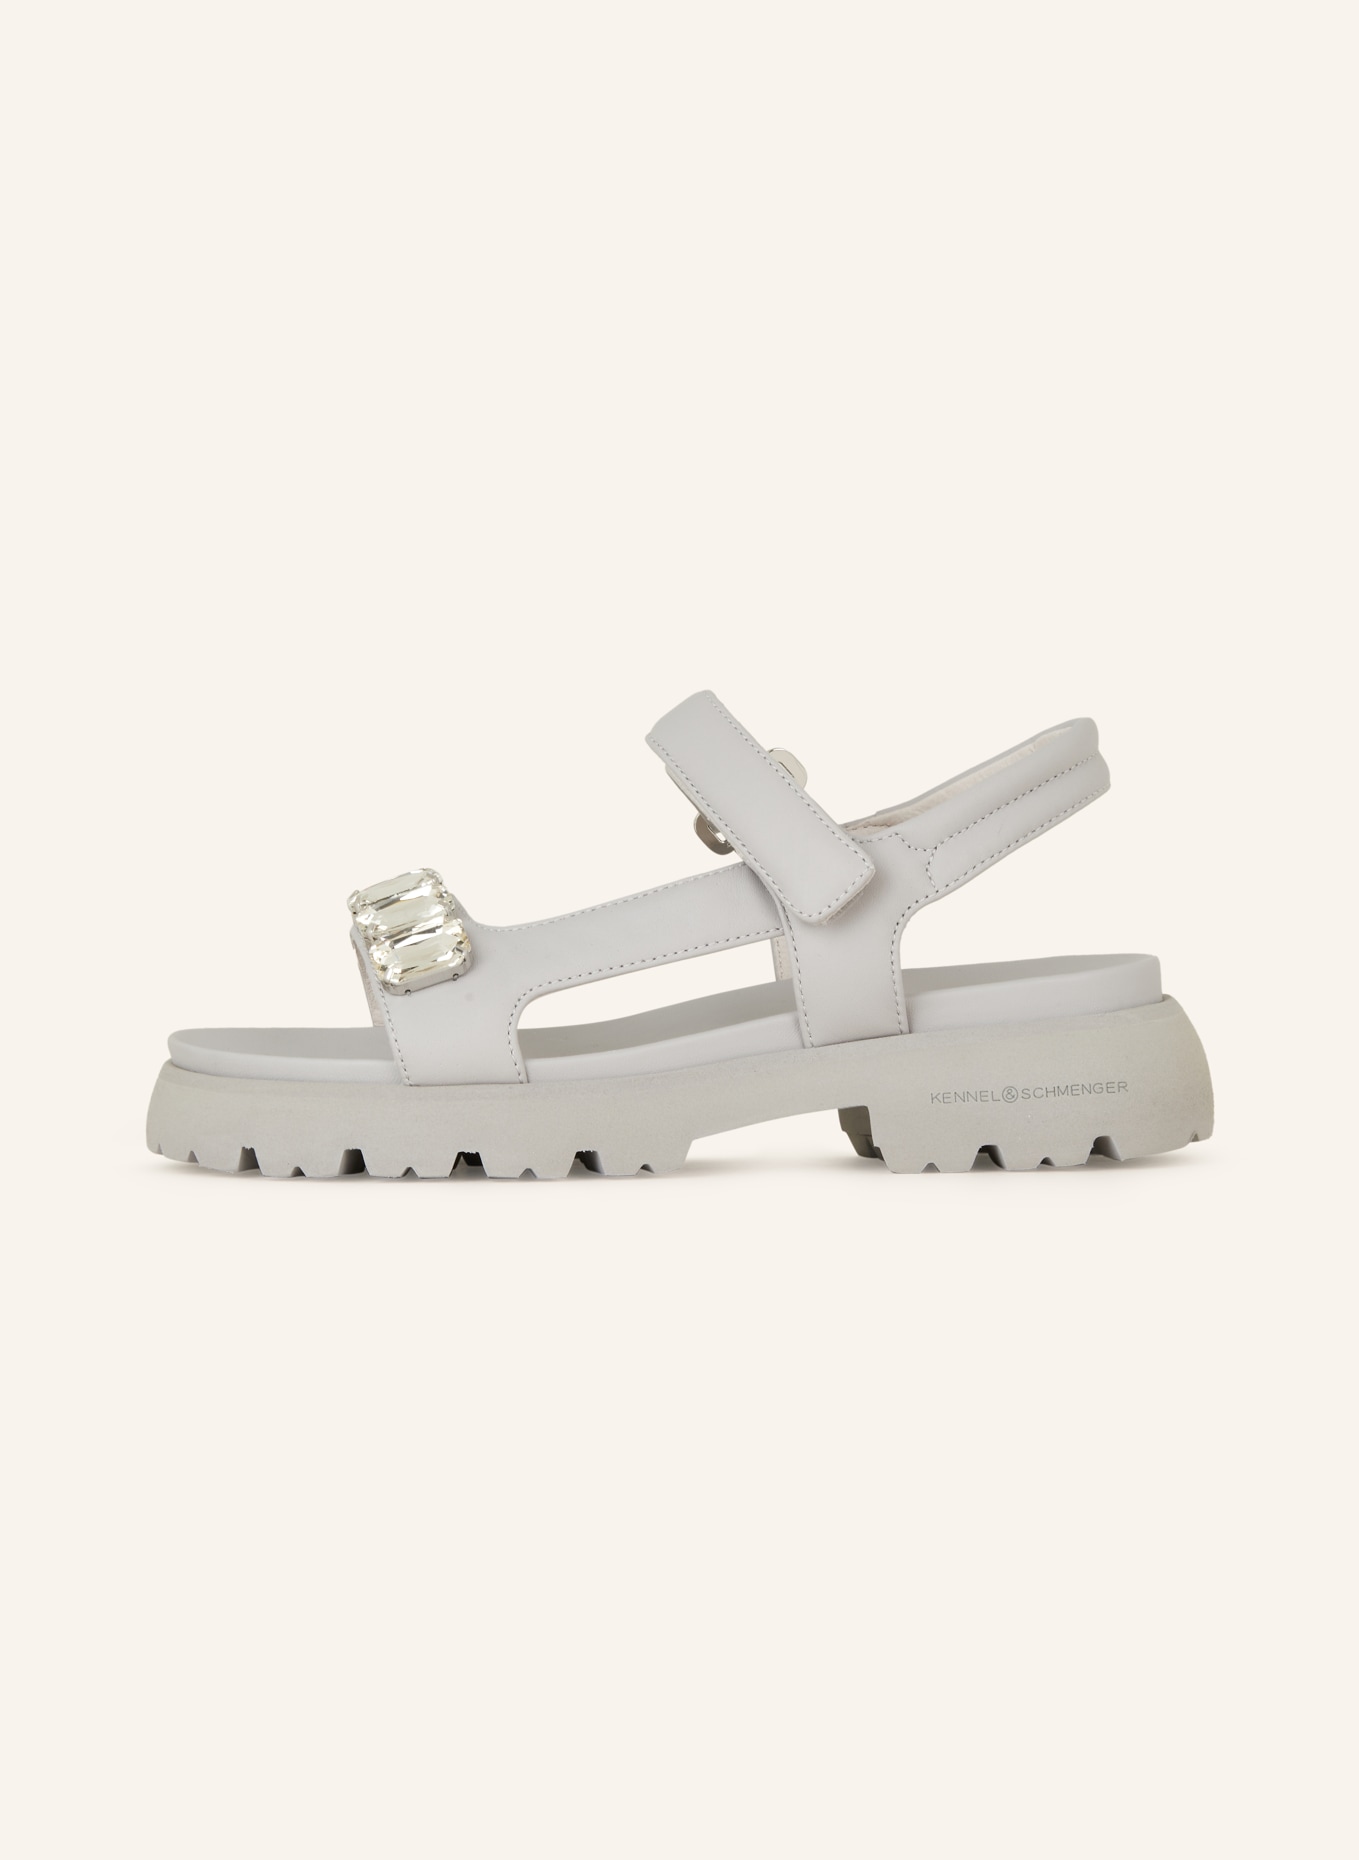 KENNEL & SCHMENGER Sandals SKILL with decorative gems, Color: GRAY (Image 4)